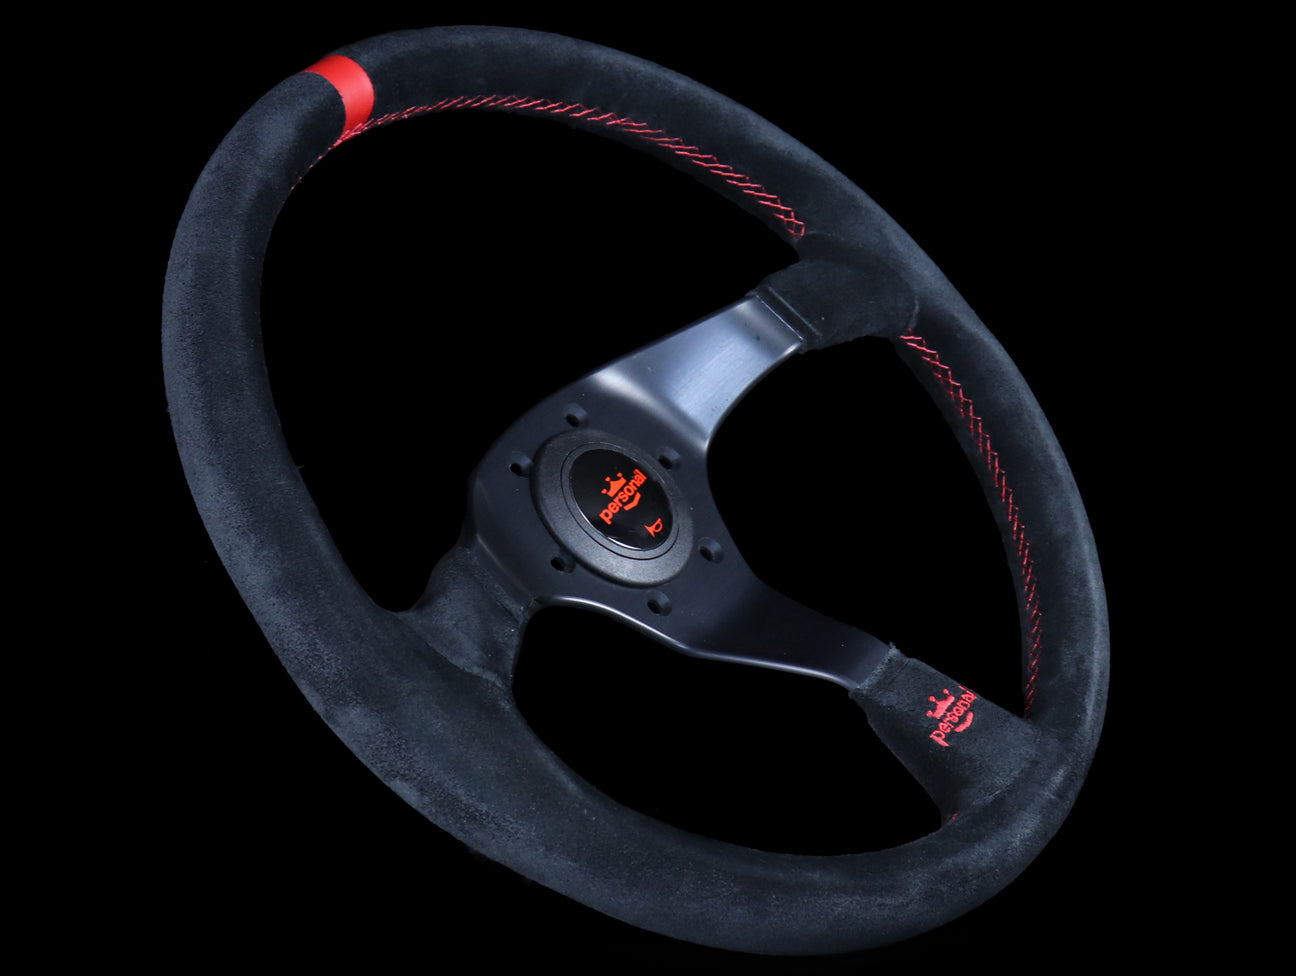 Personal Trophy 350mm Steering Wheel - Black Suede / Red Stitch